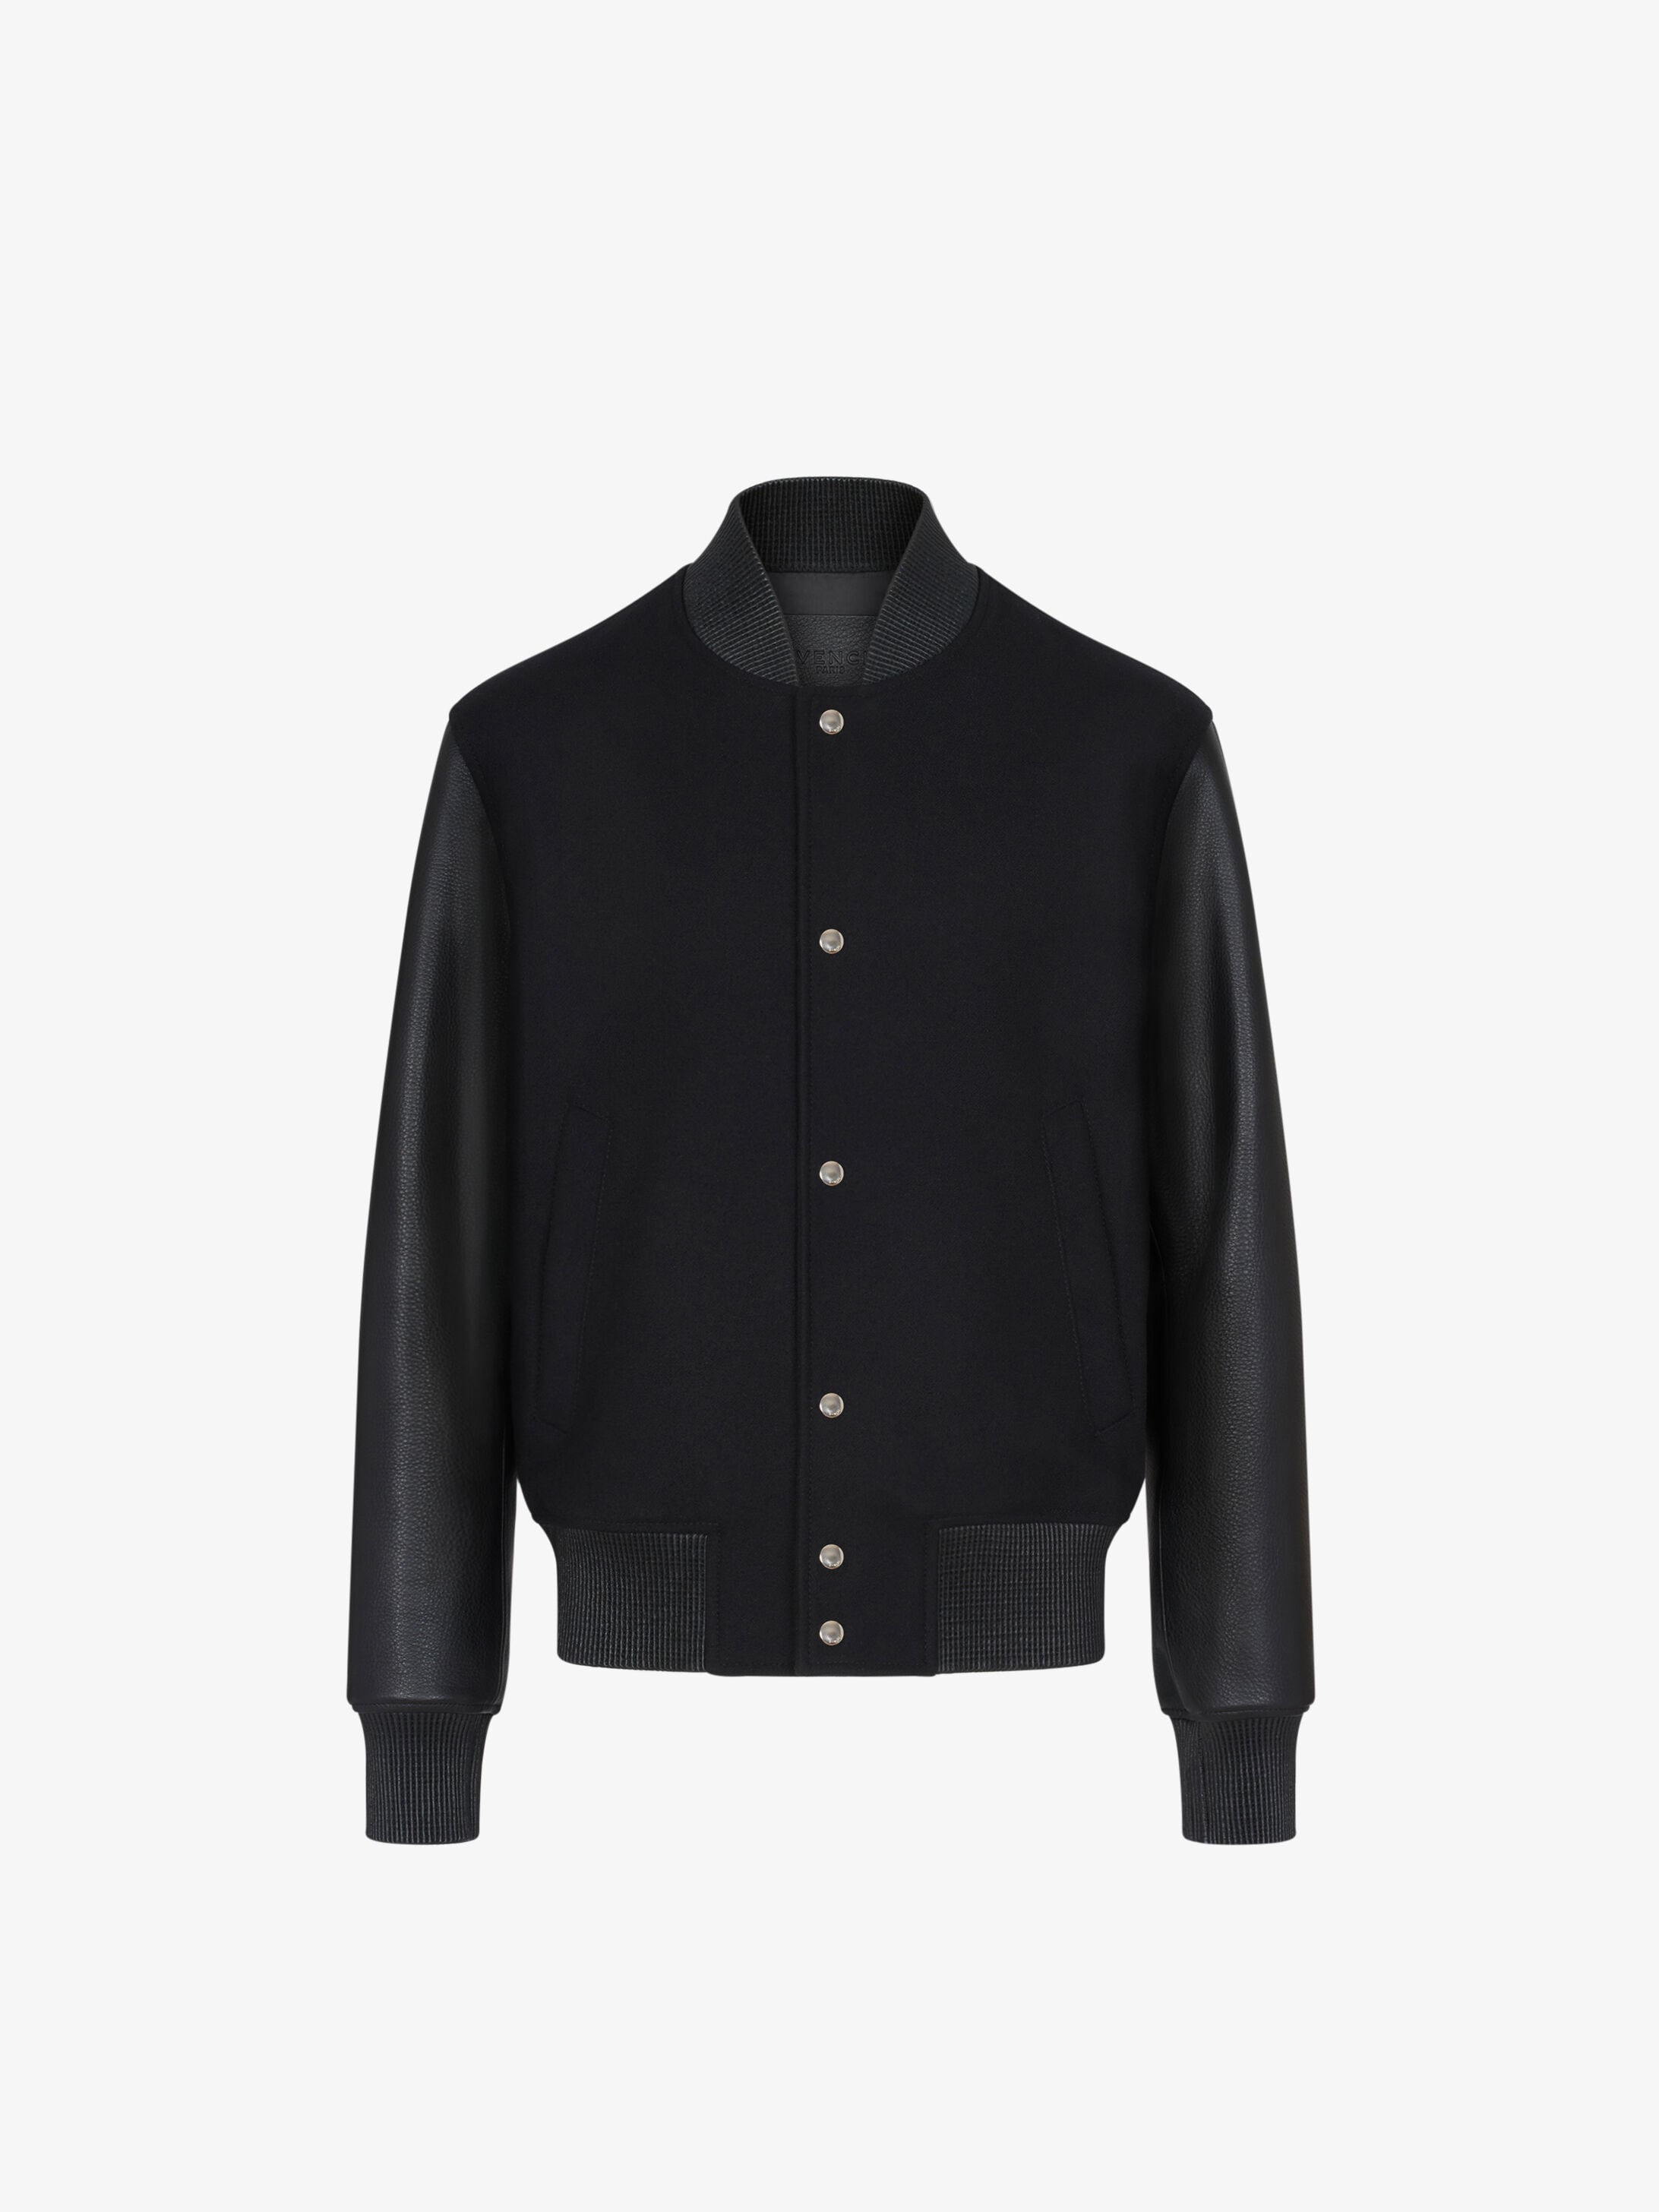 GIVENCHY Bull bomber jacket in wool and 